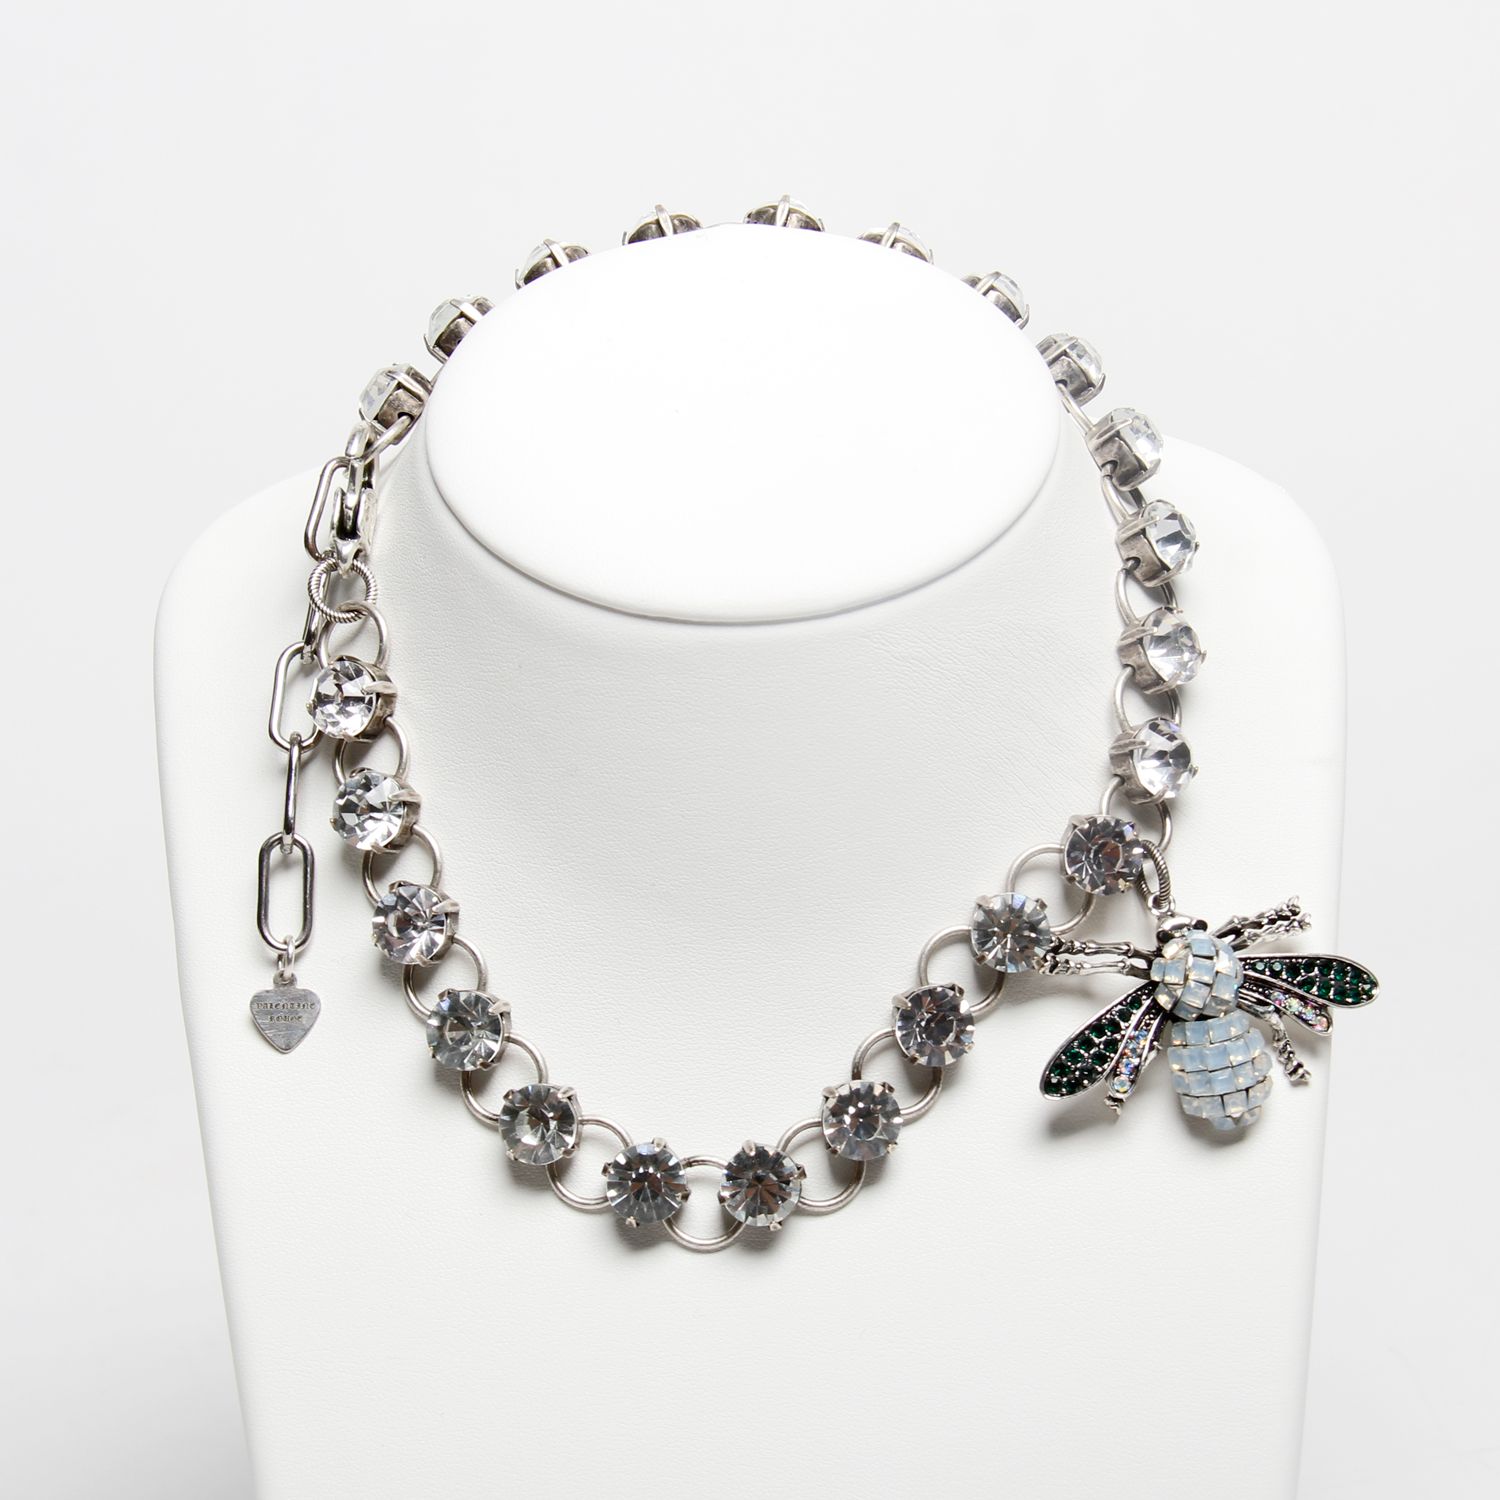 Valentine Rouge: Silver Queen Bee Lariat Necklace Product Image 4 of 5